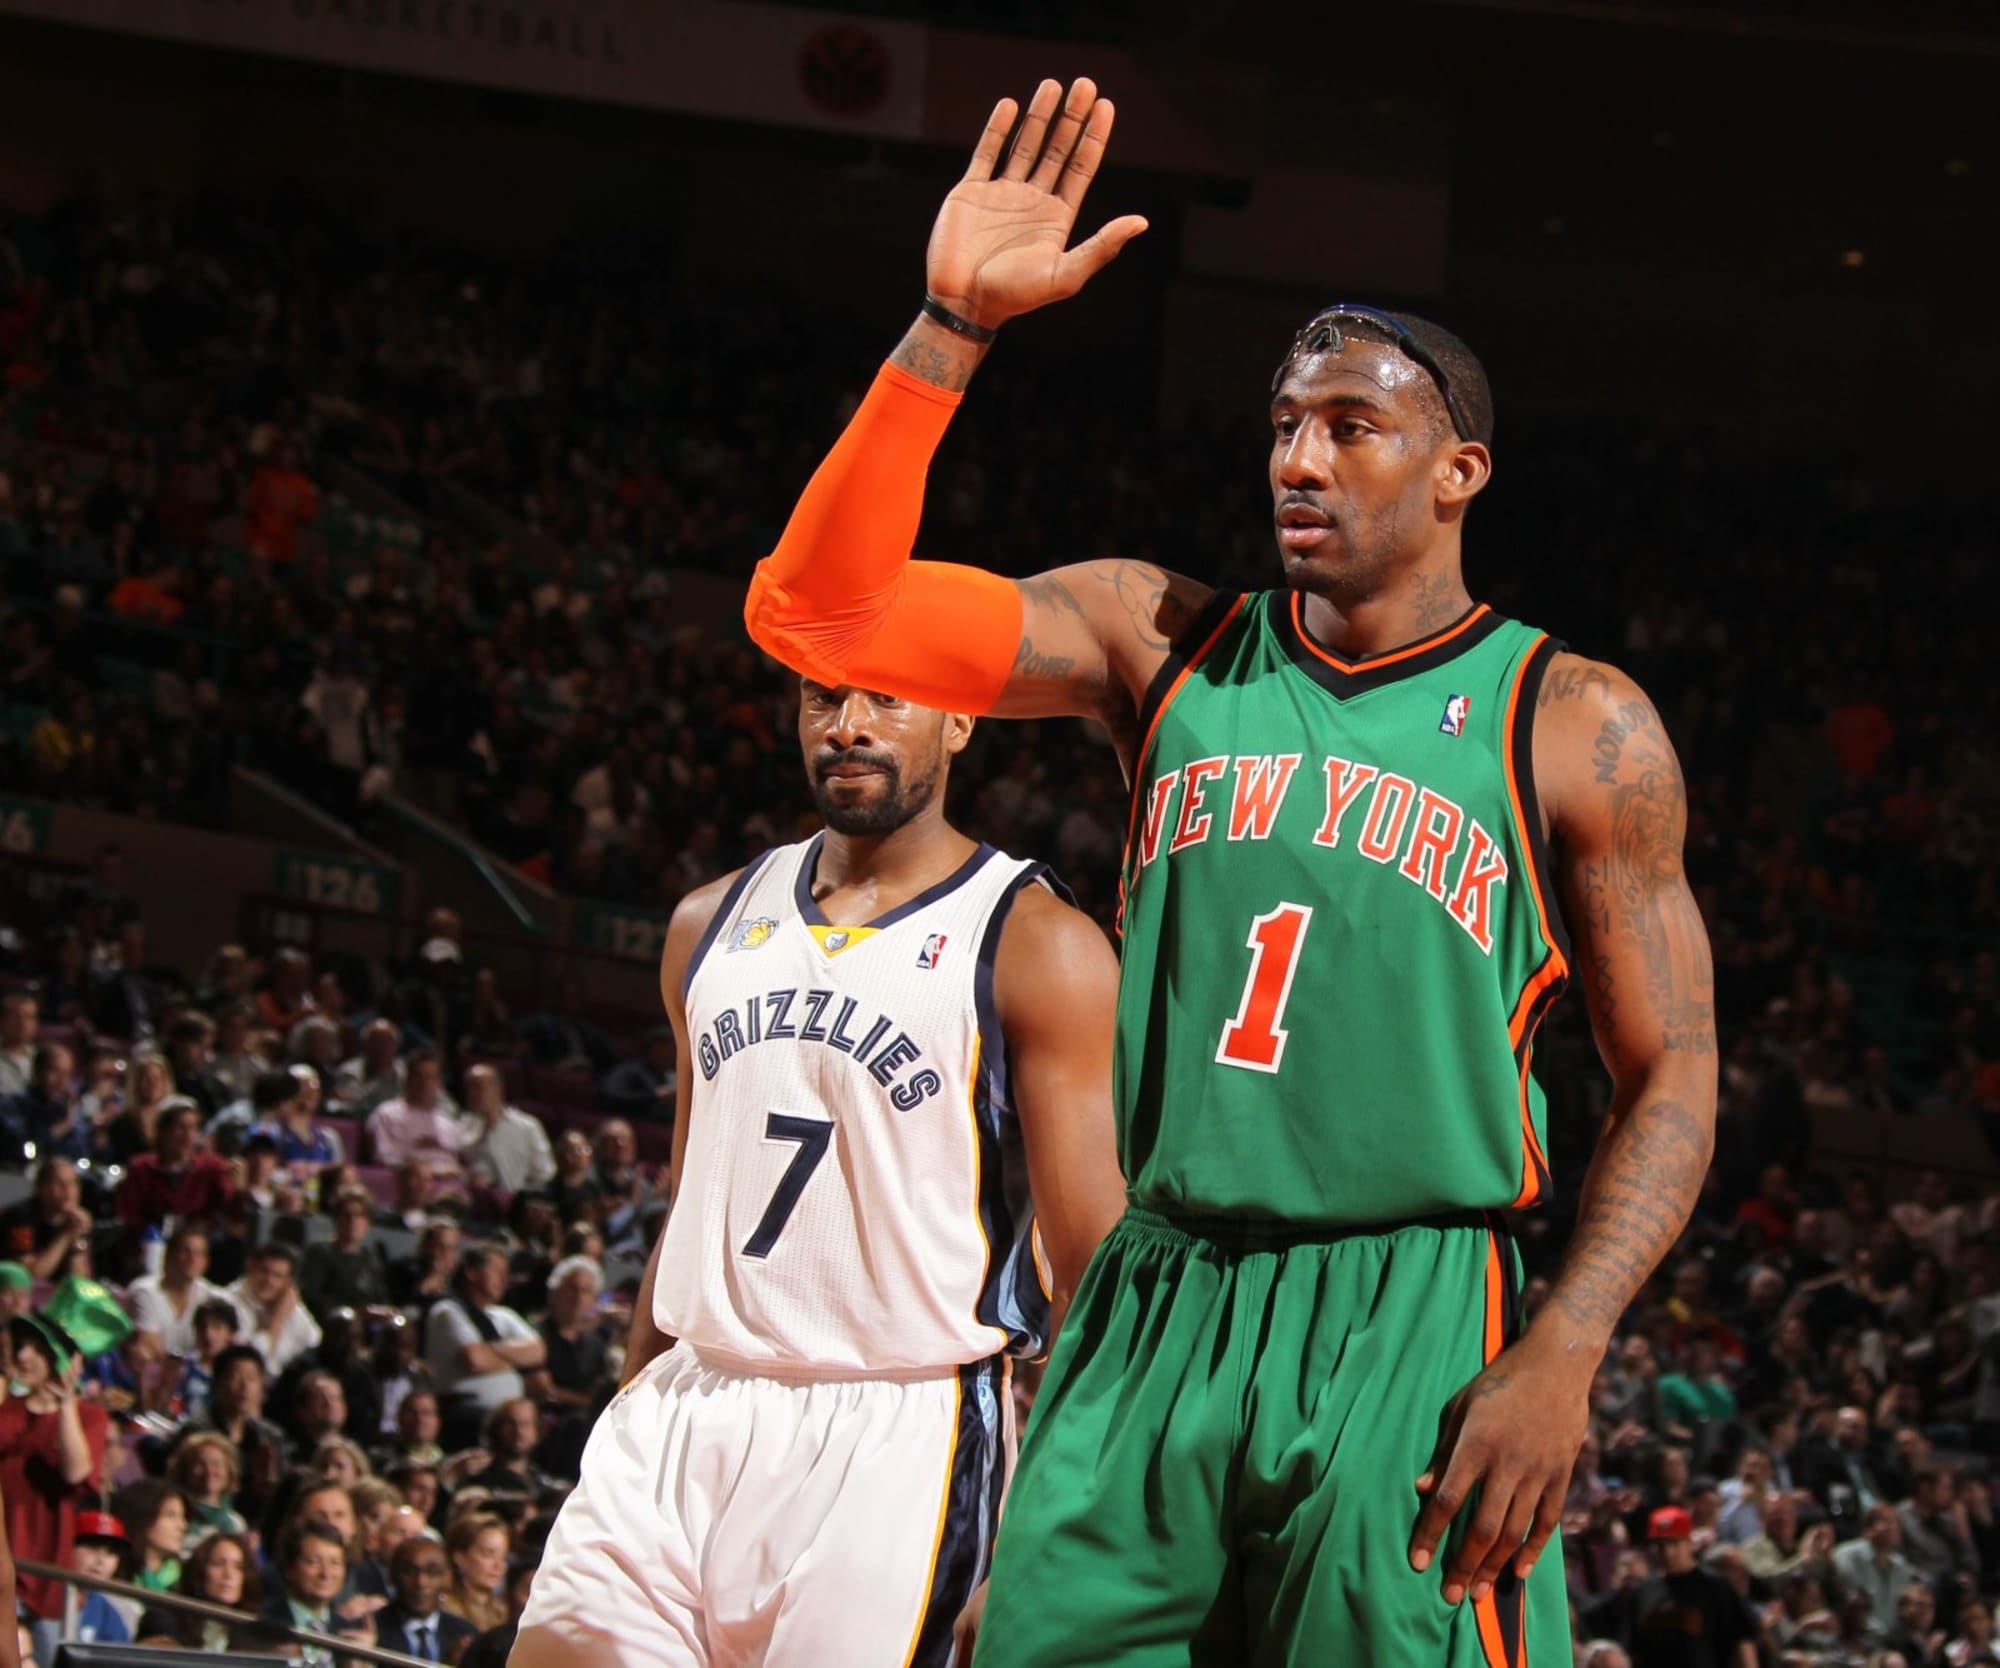 NBA Trade Speculation: What Can Memphis Grizzlies Guard OJ Mayo